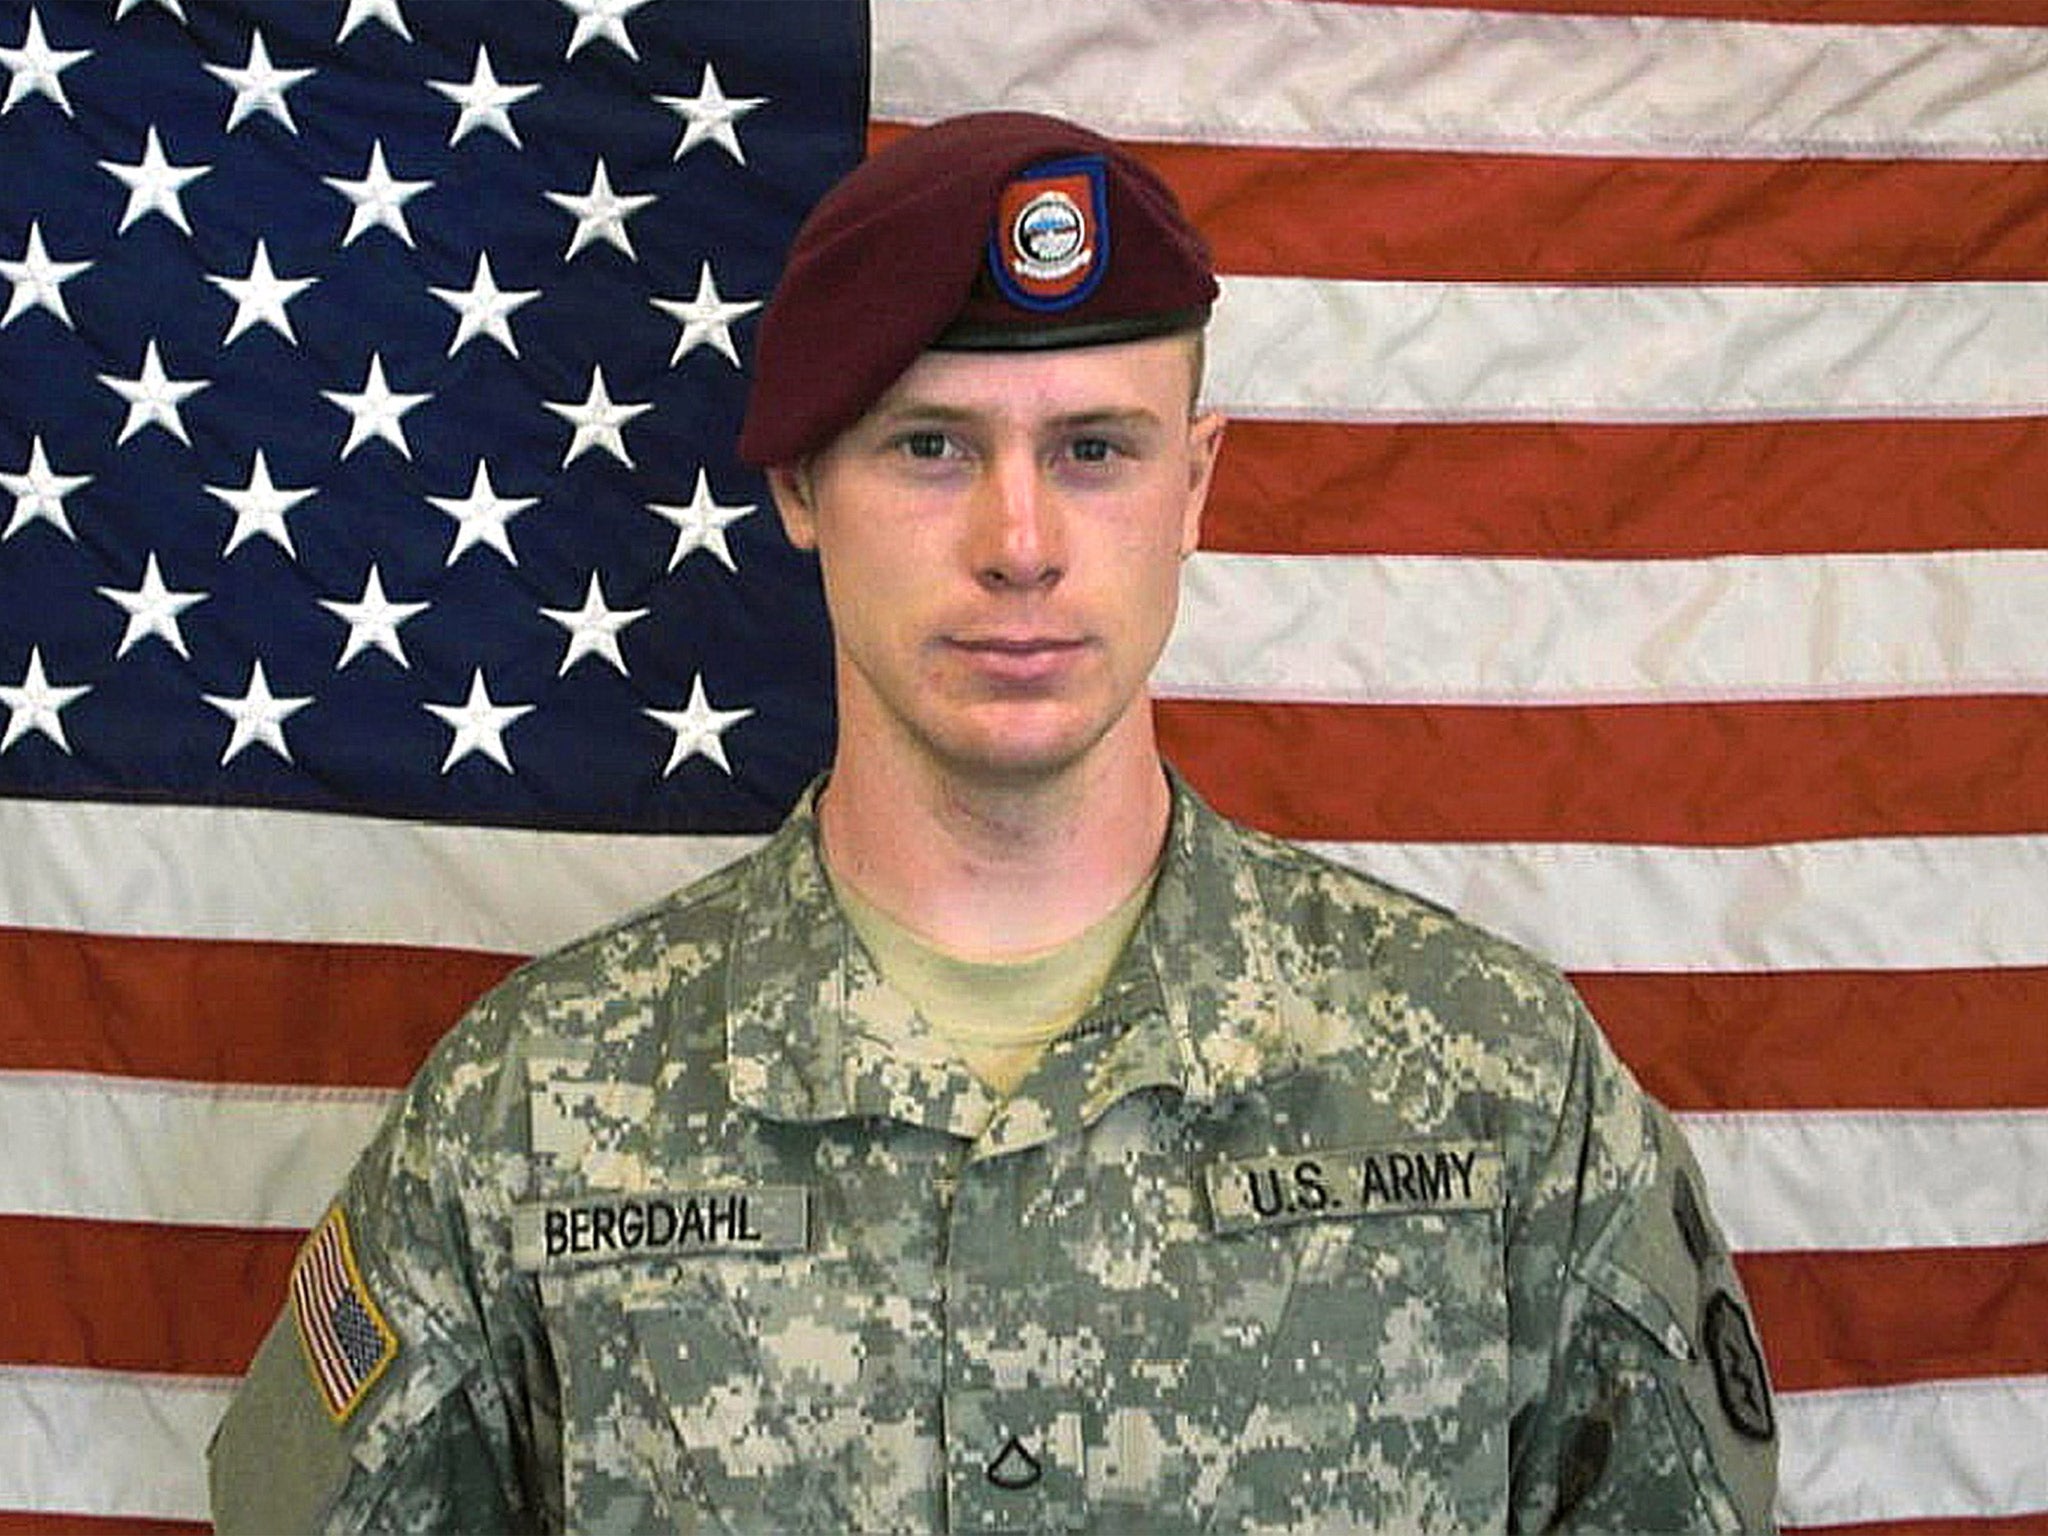 Bowe Bergdahl is currently under medical and psychological surveillance at a US military hospital in Germany